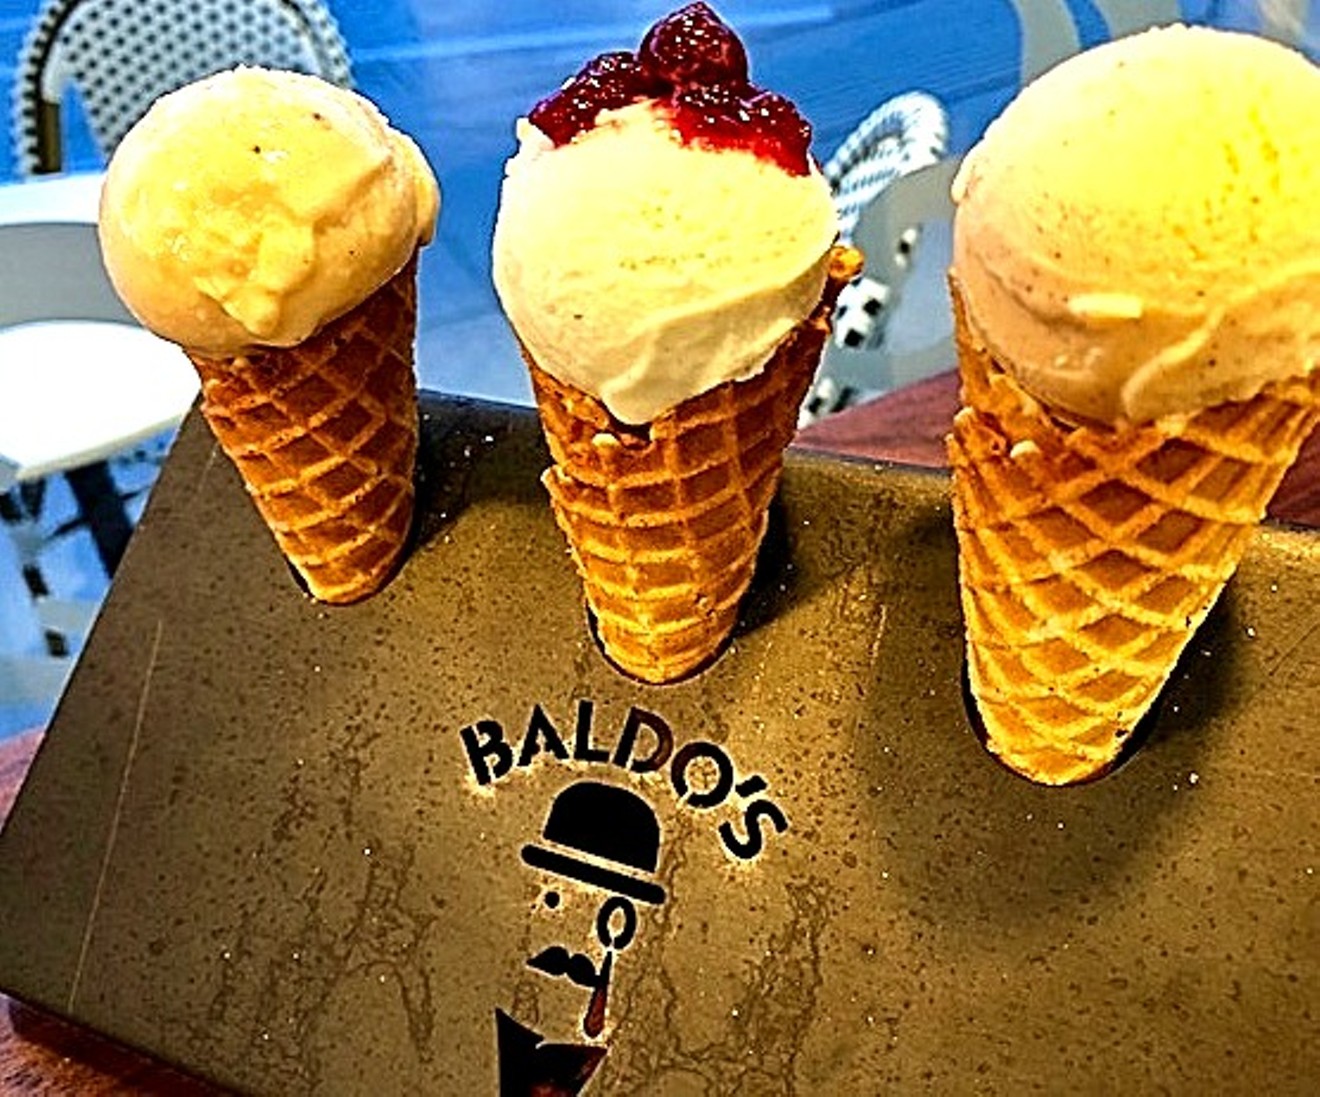 Baldo's mini cone flight is a commitment-phobe's dream: sample flavors like salted caramel, winter spruce and cinnamon cayenne without buying the whole cow.